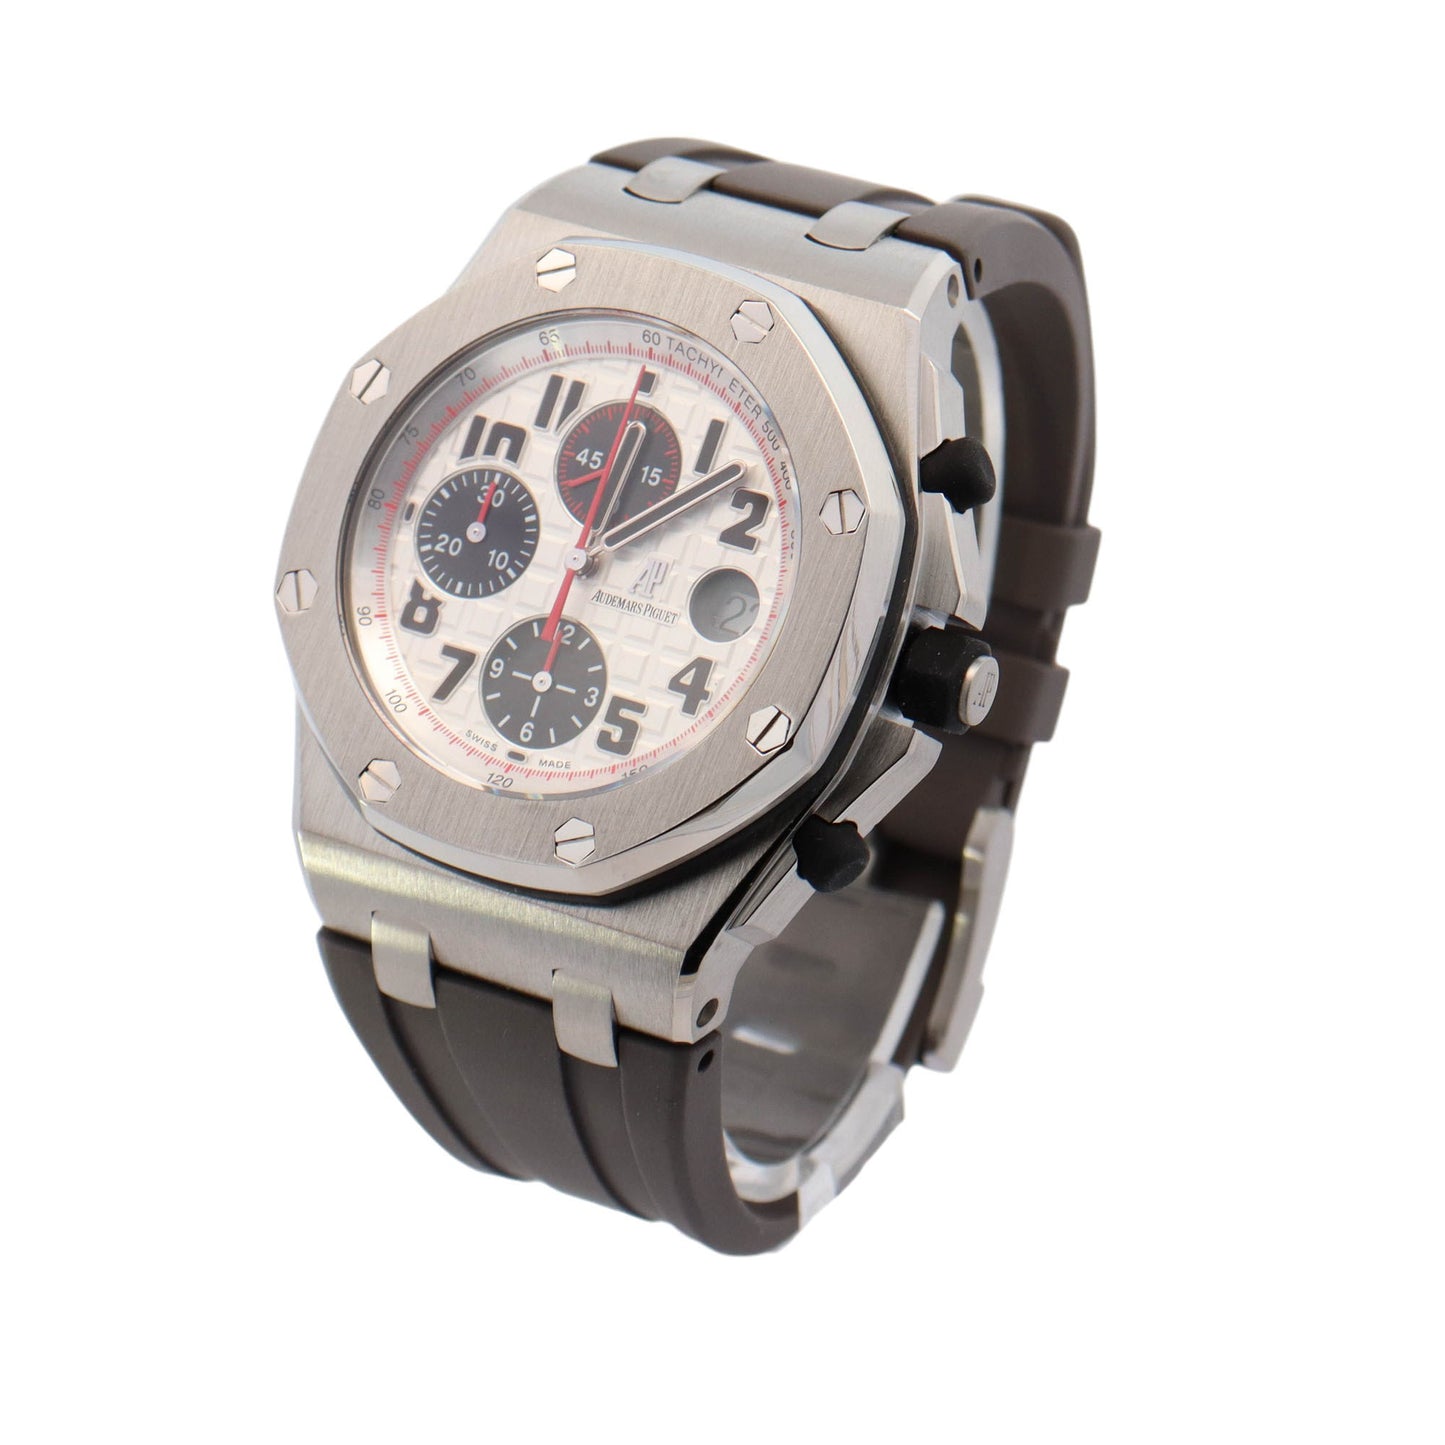 Audemars Piguet Royal Oak Offshore Stainless Steel 42mm White Chronograph Dial Watch Reference #: 26170ST.OO.1000ST.01 - Happy Jewelers Fine Jewelry Lifetime Warranty